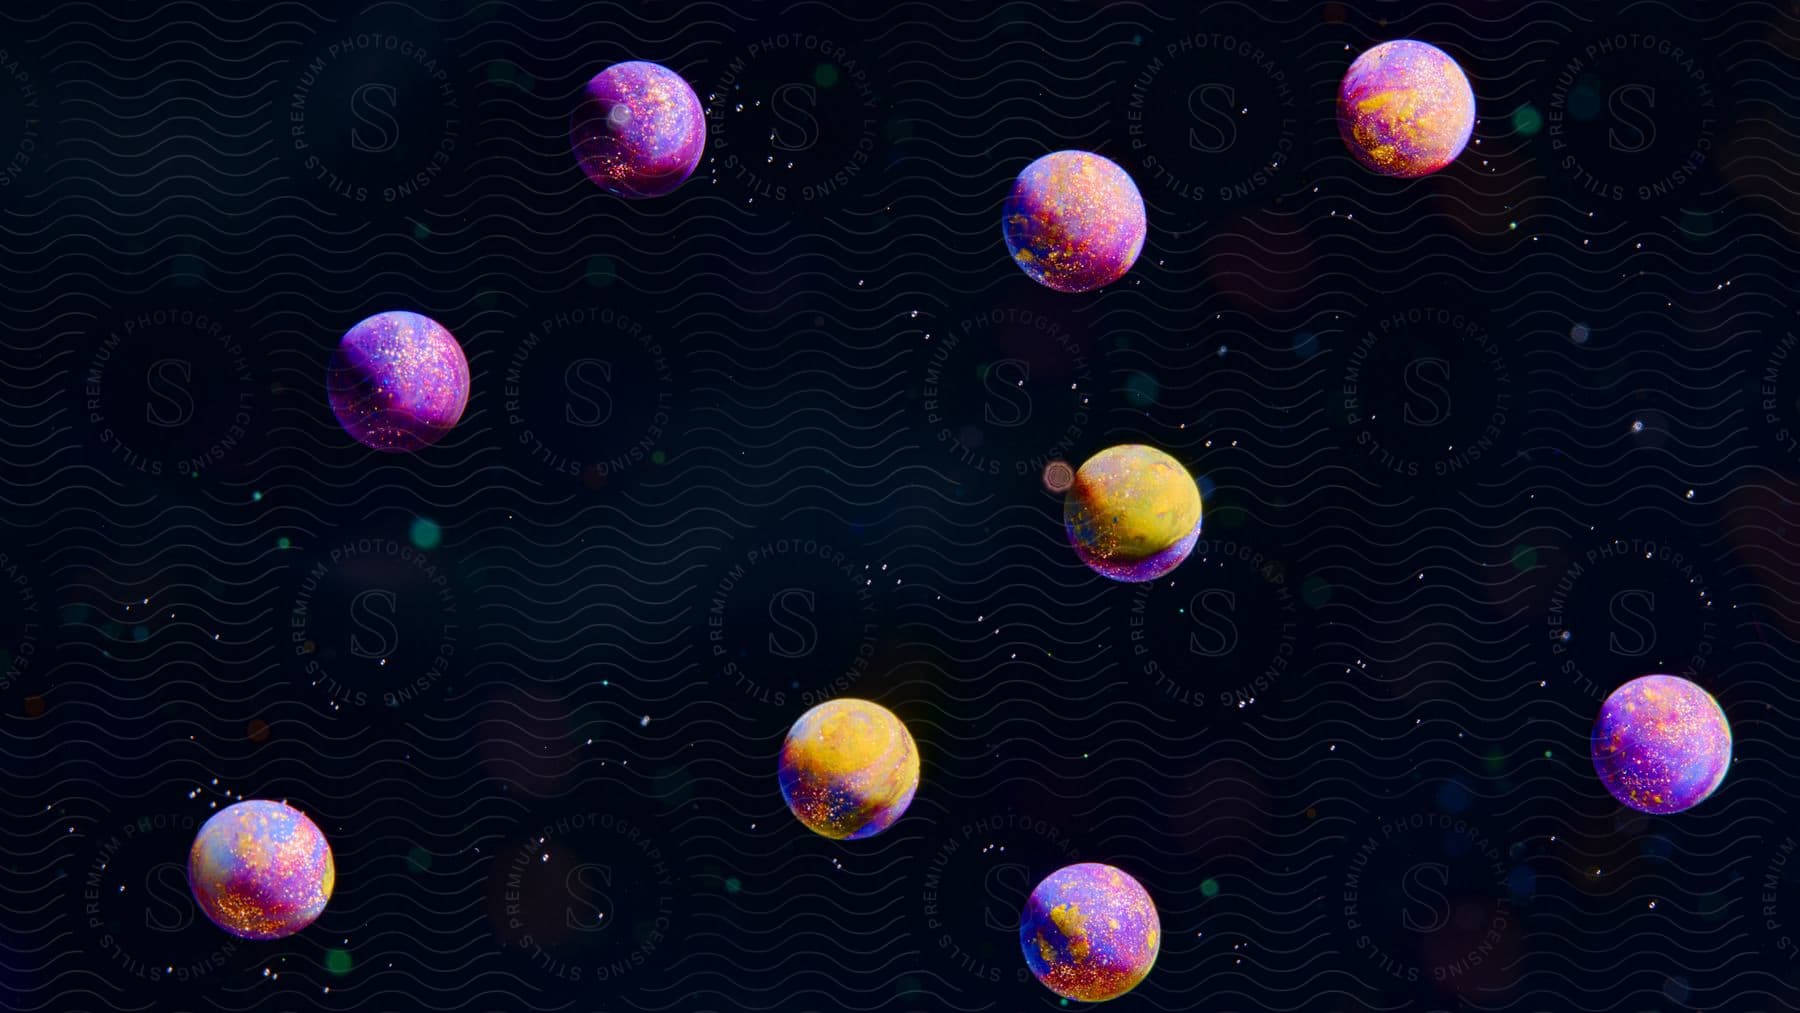 A picture of outer space with nine purple and yellow planets